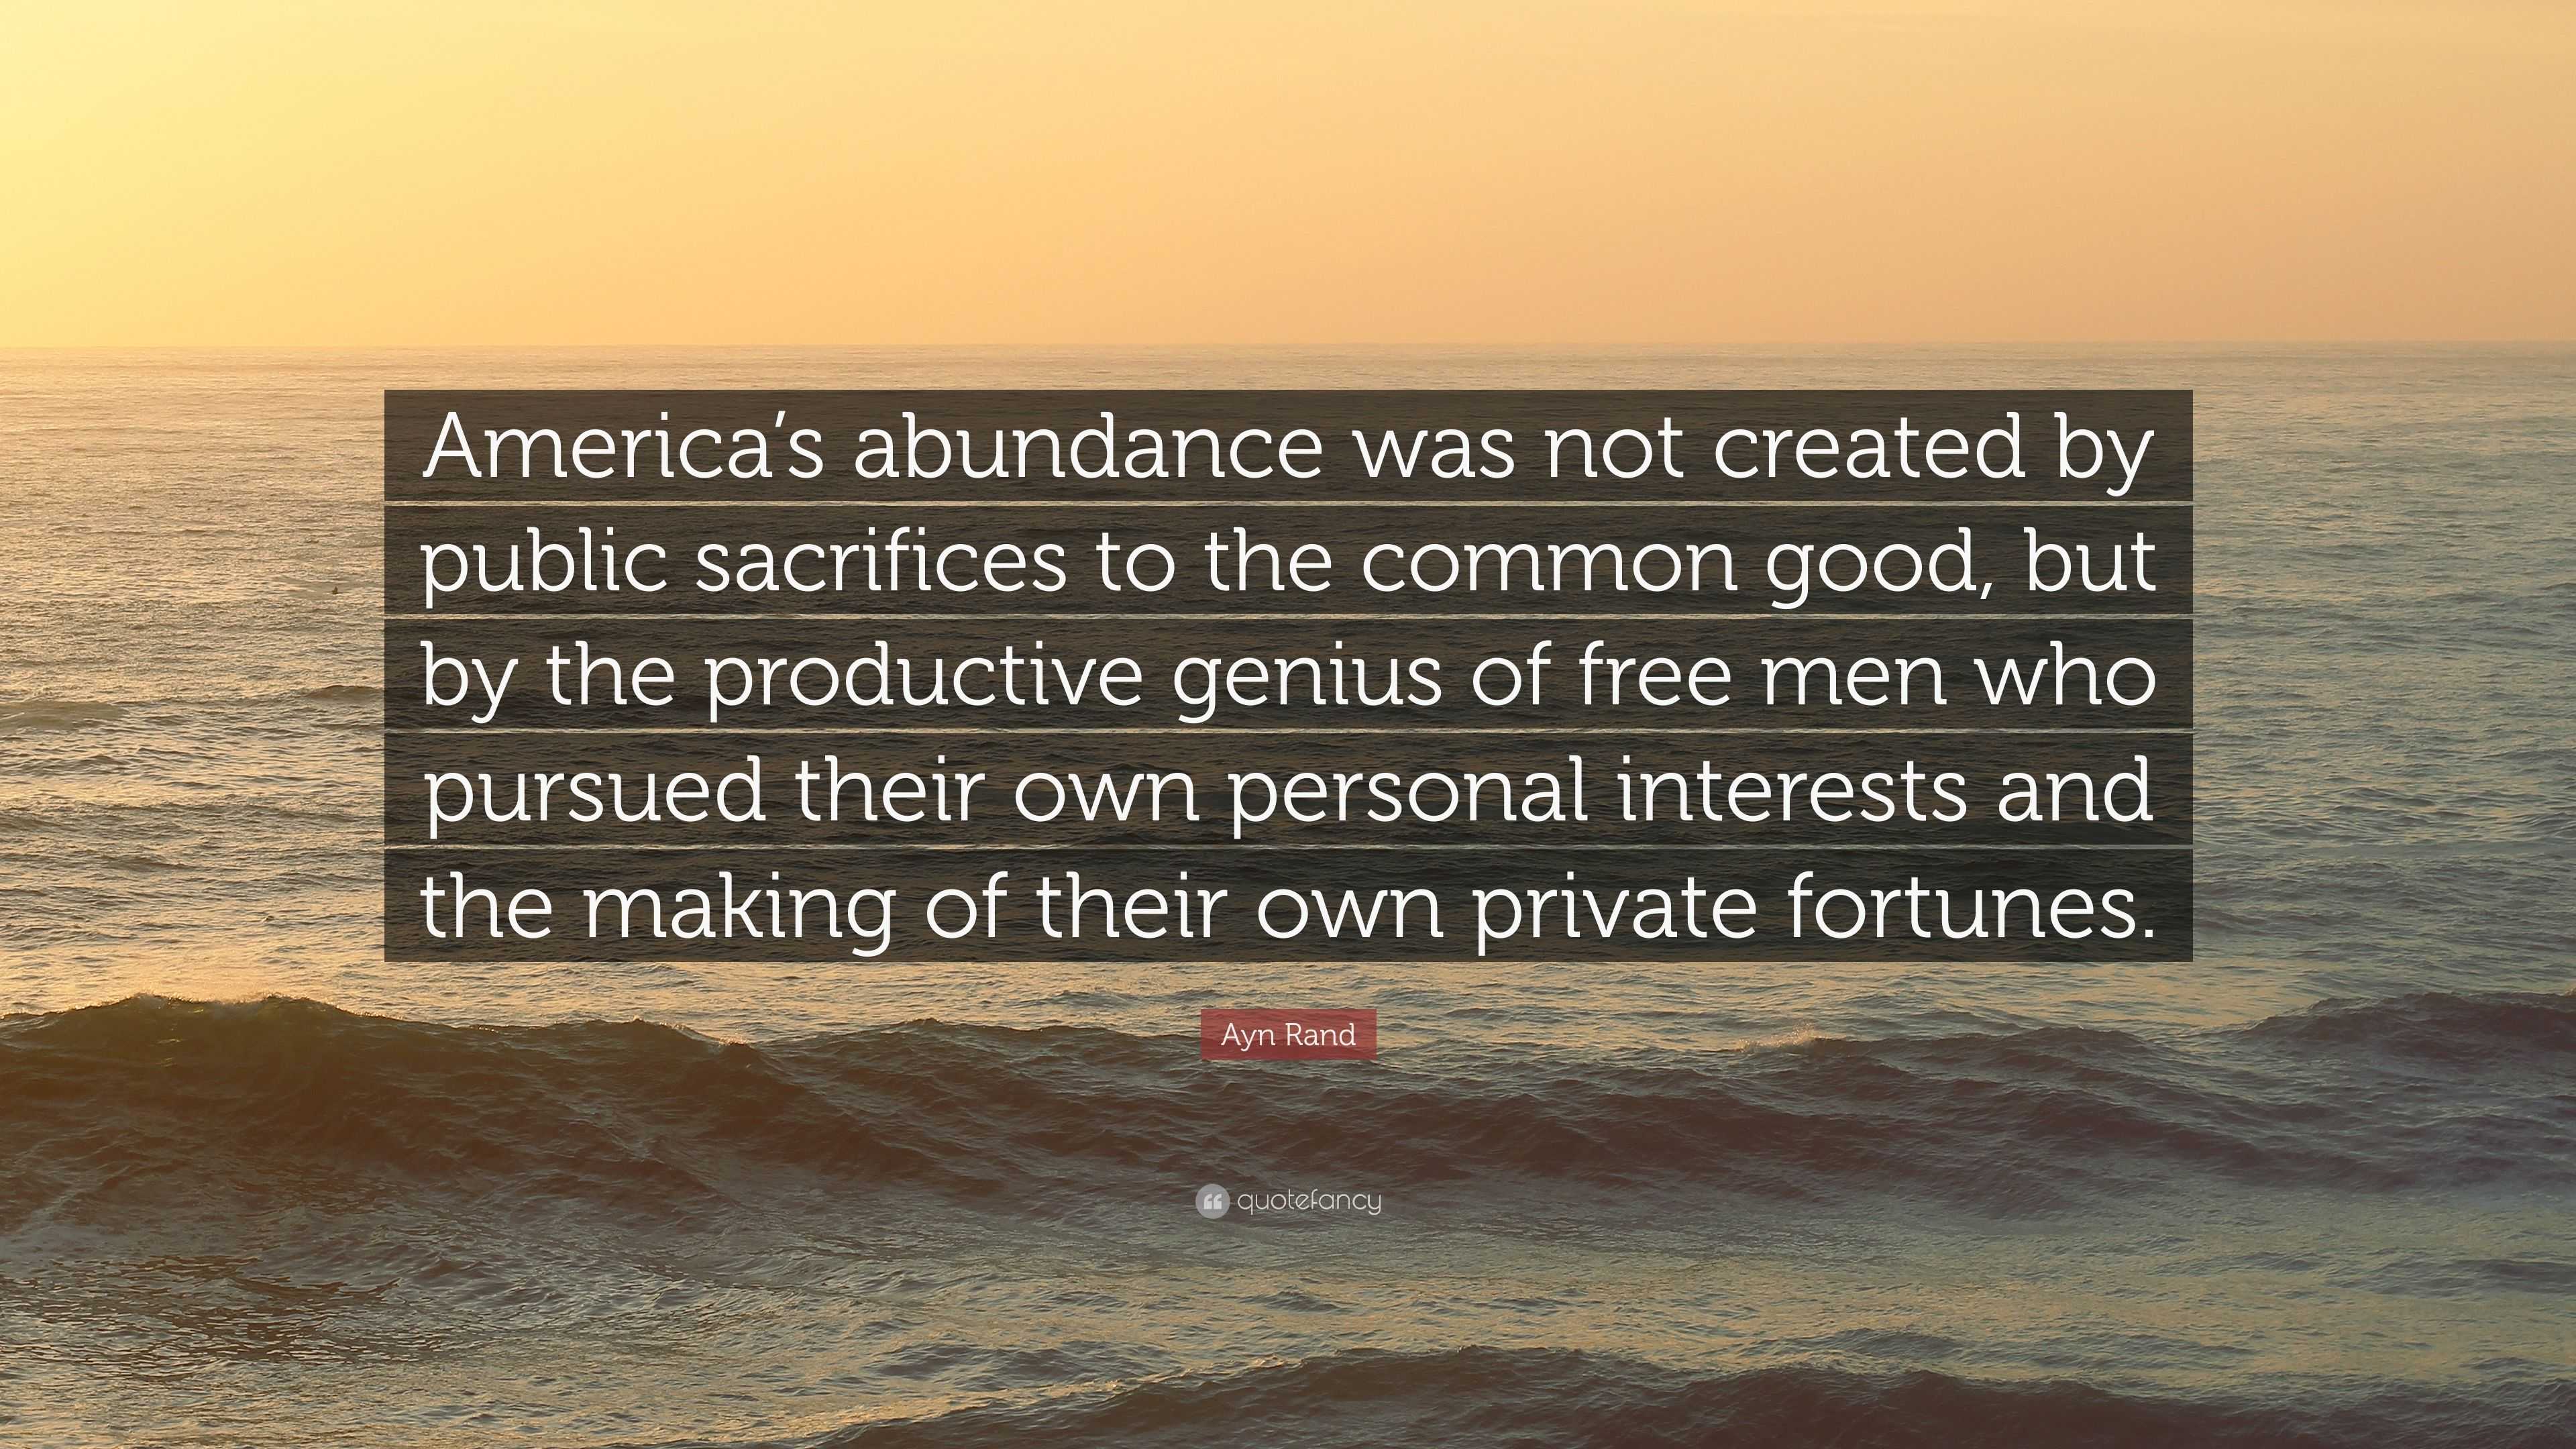 Ayn Rand Quote: “America's abundance was not created by public sacrifices  to the common good, but by the productive genius of free men wh”